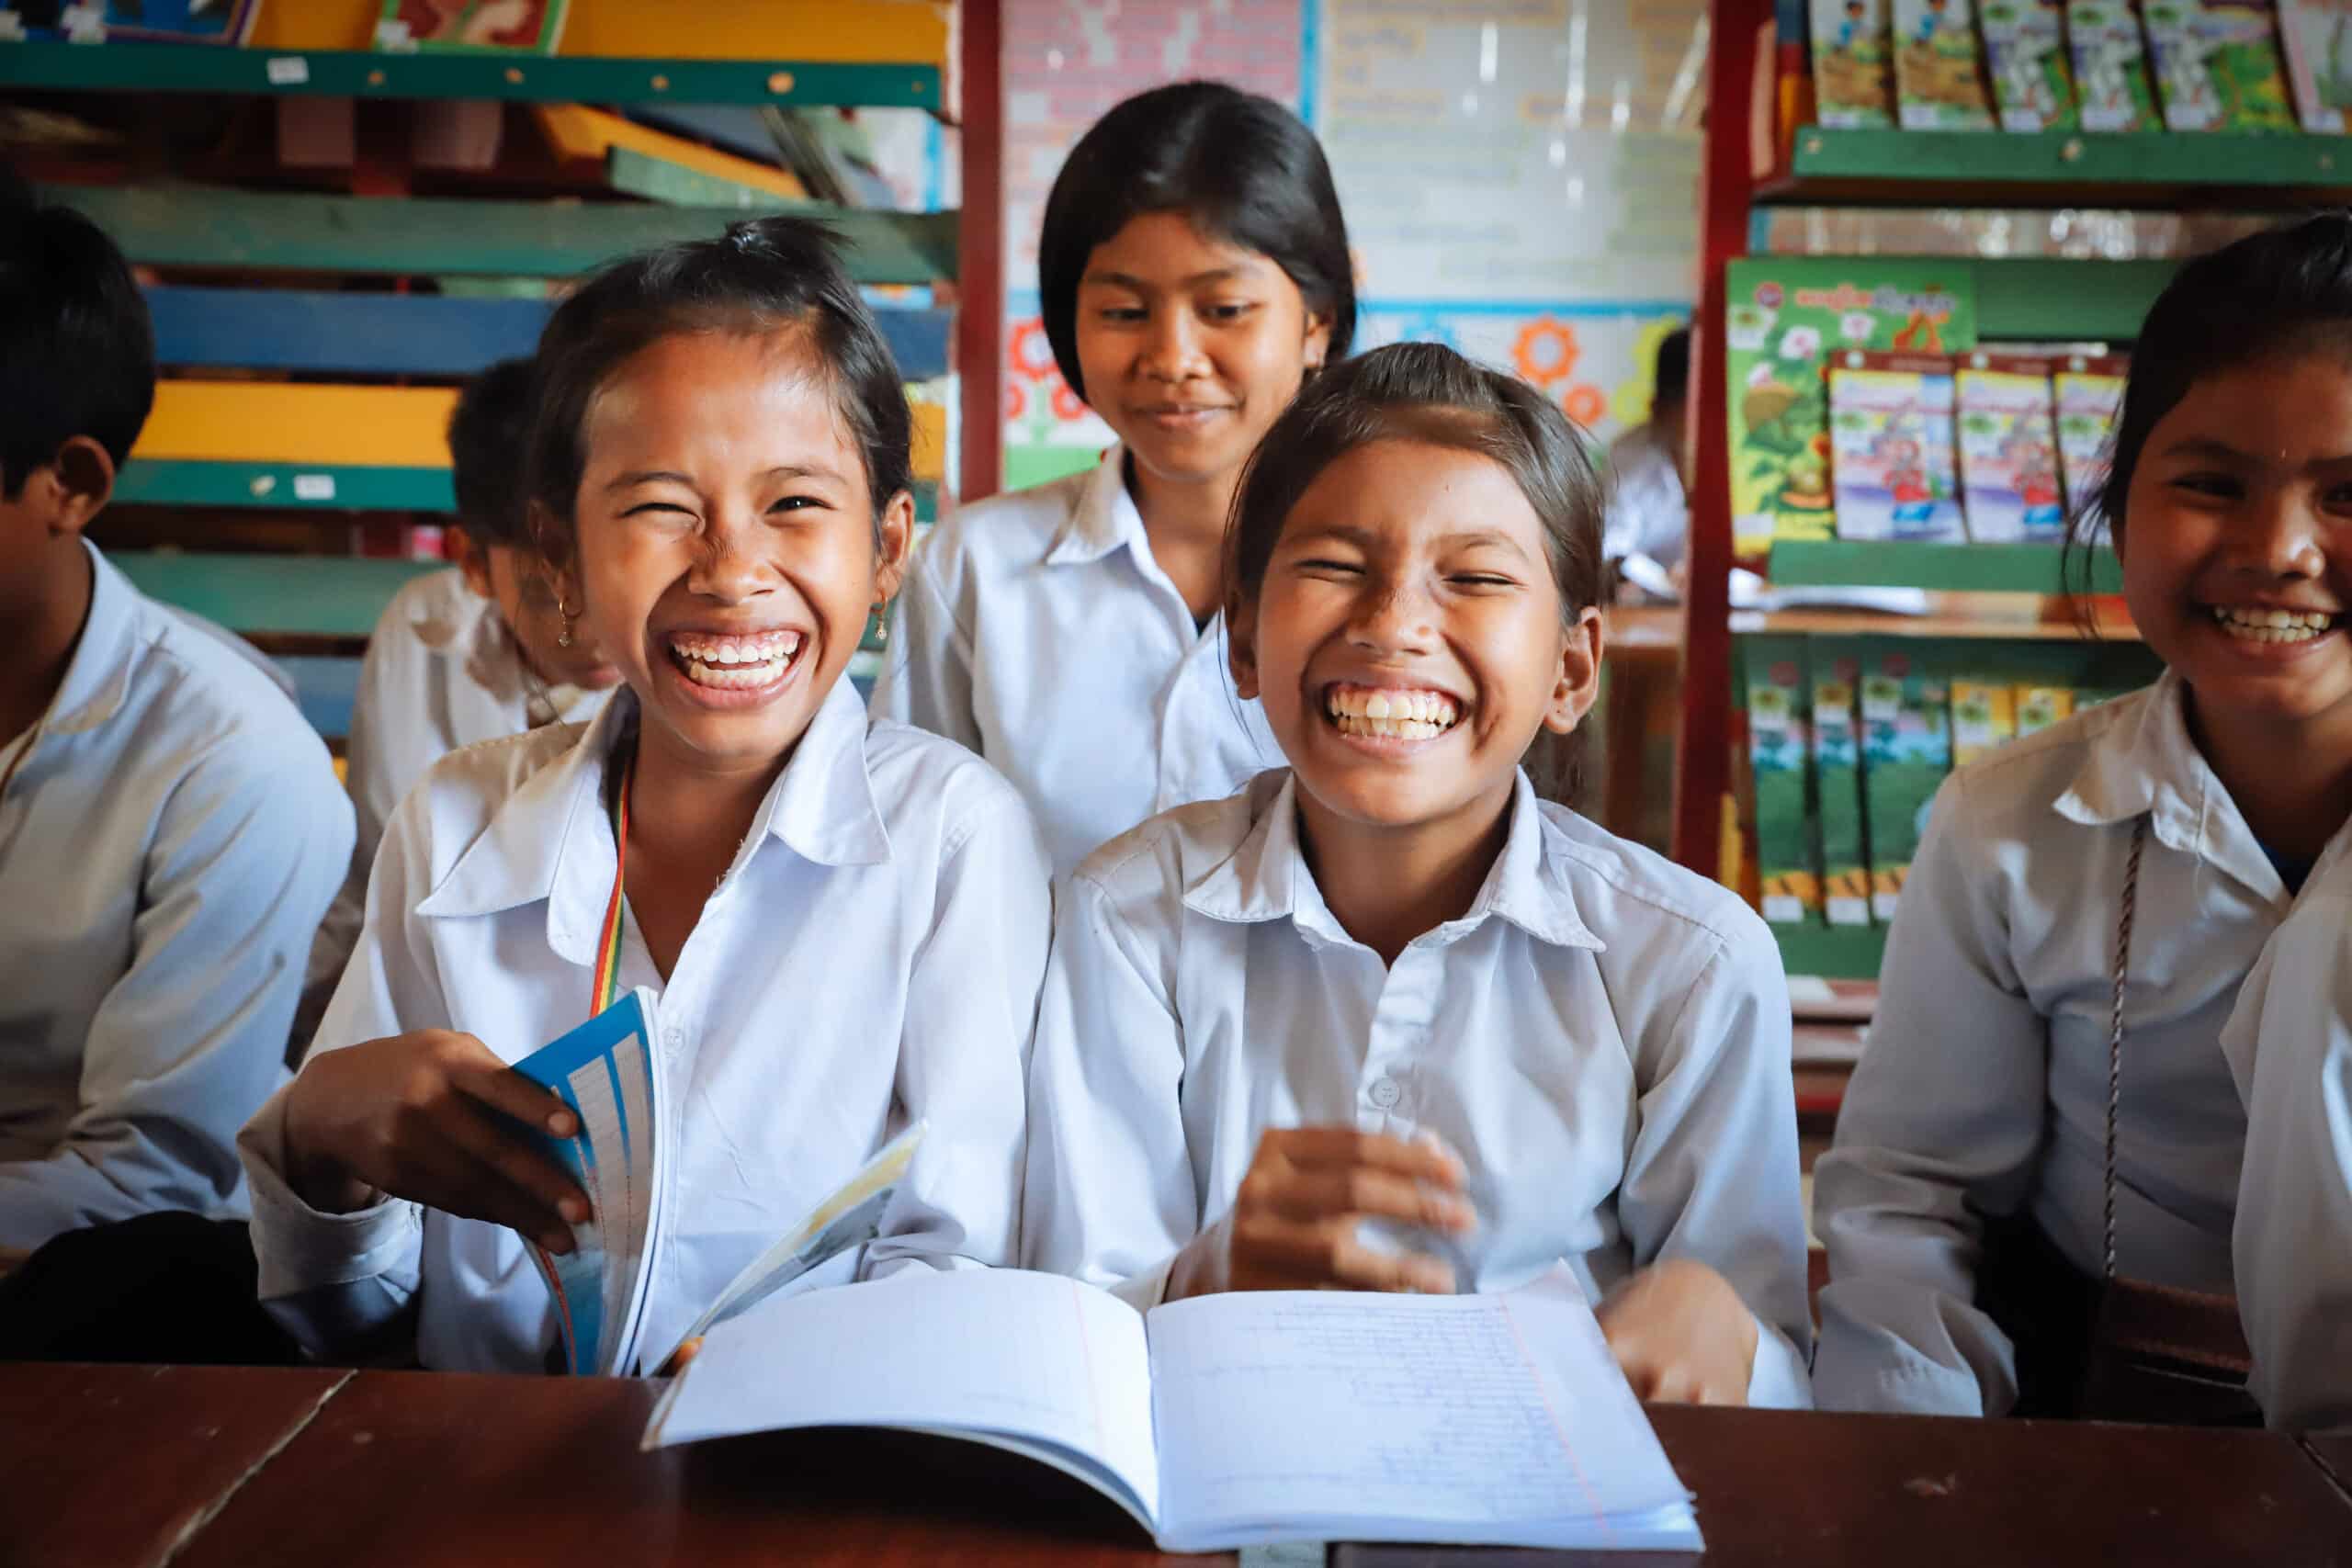 Girls smiling with books in front of them